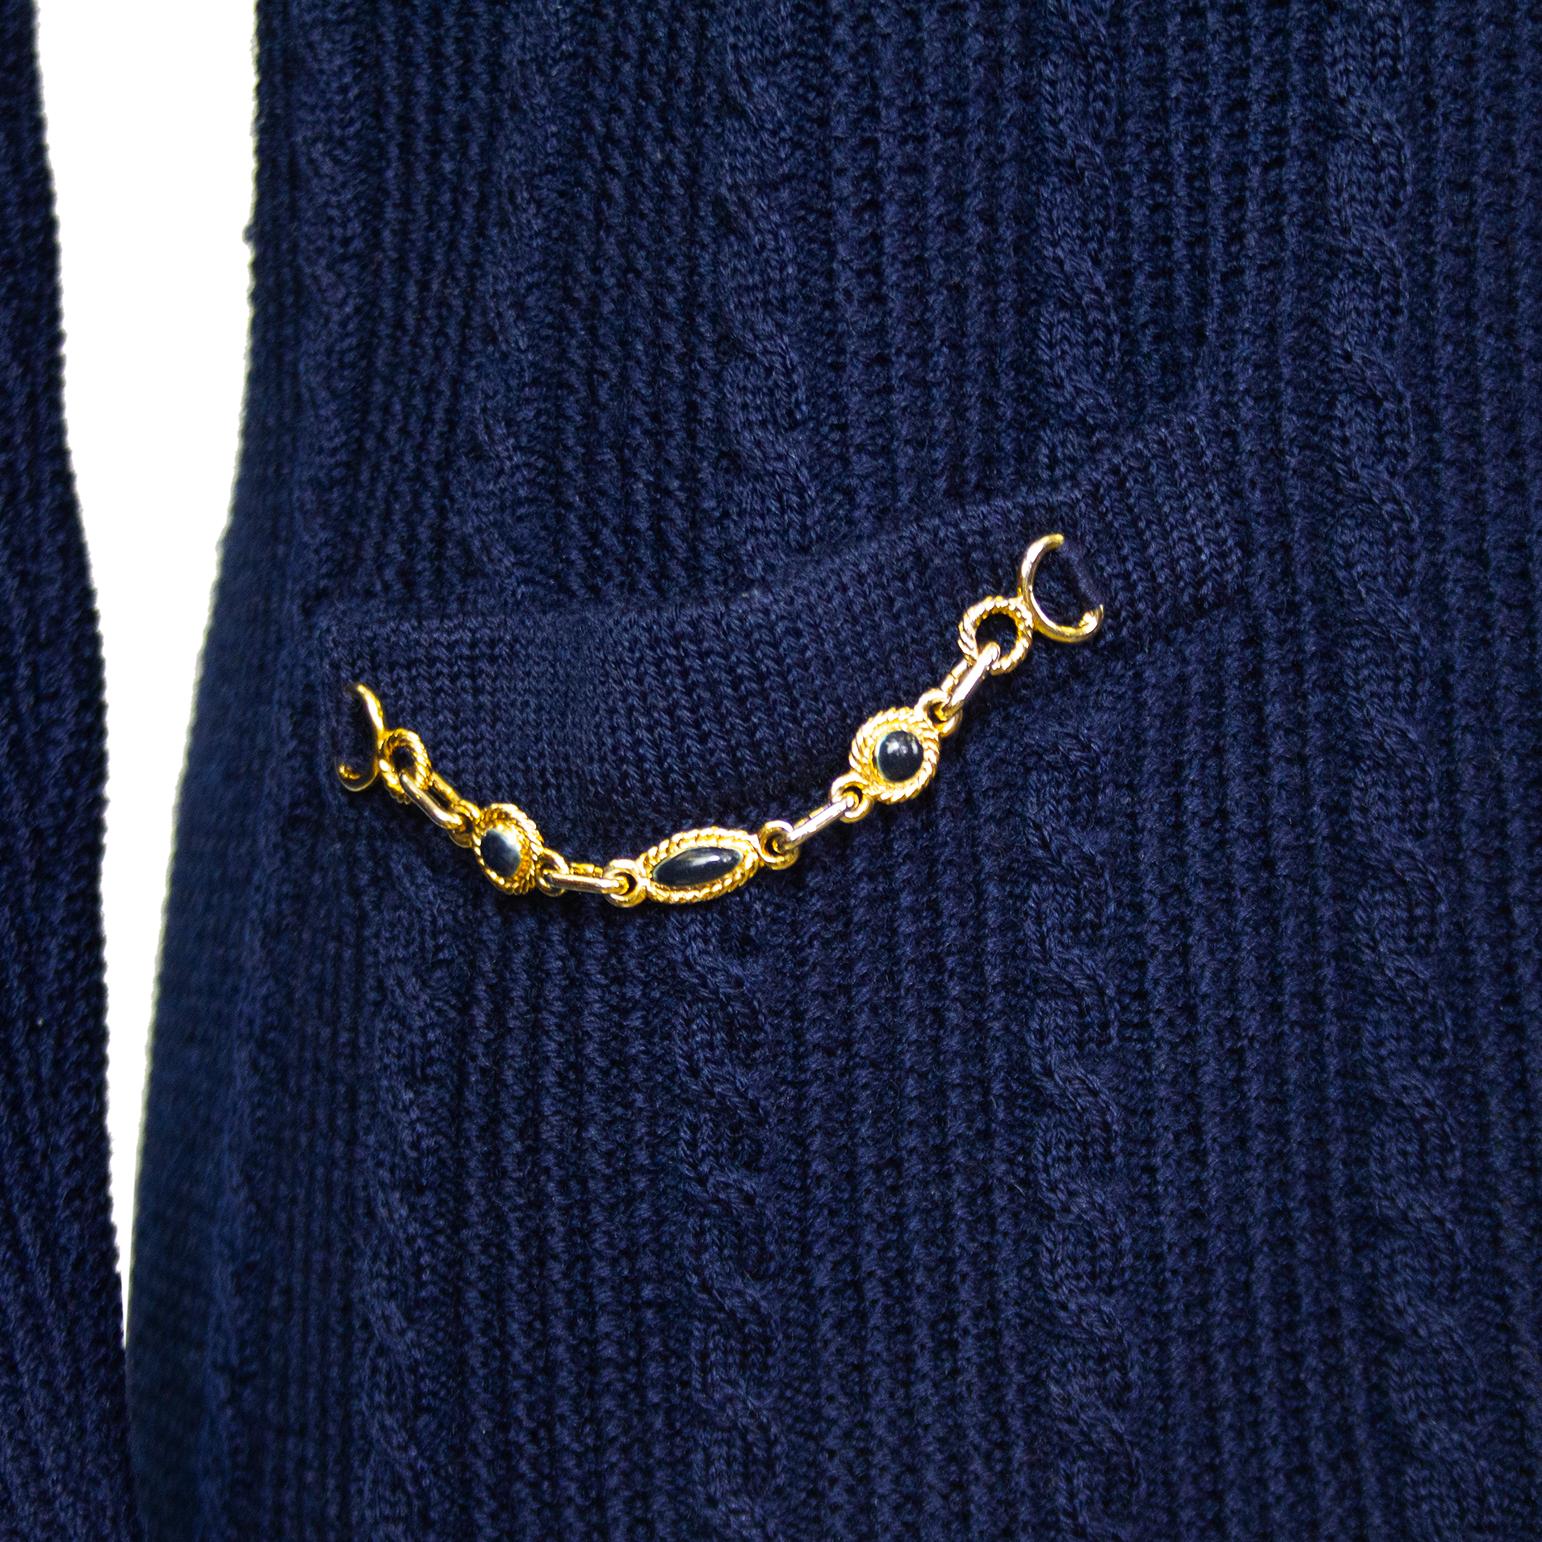 Women's 1970s Celine Navy Wool Knit Cardigan with Chains